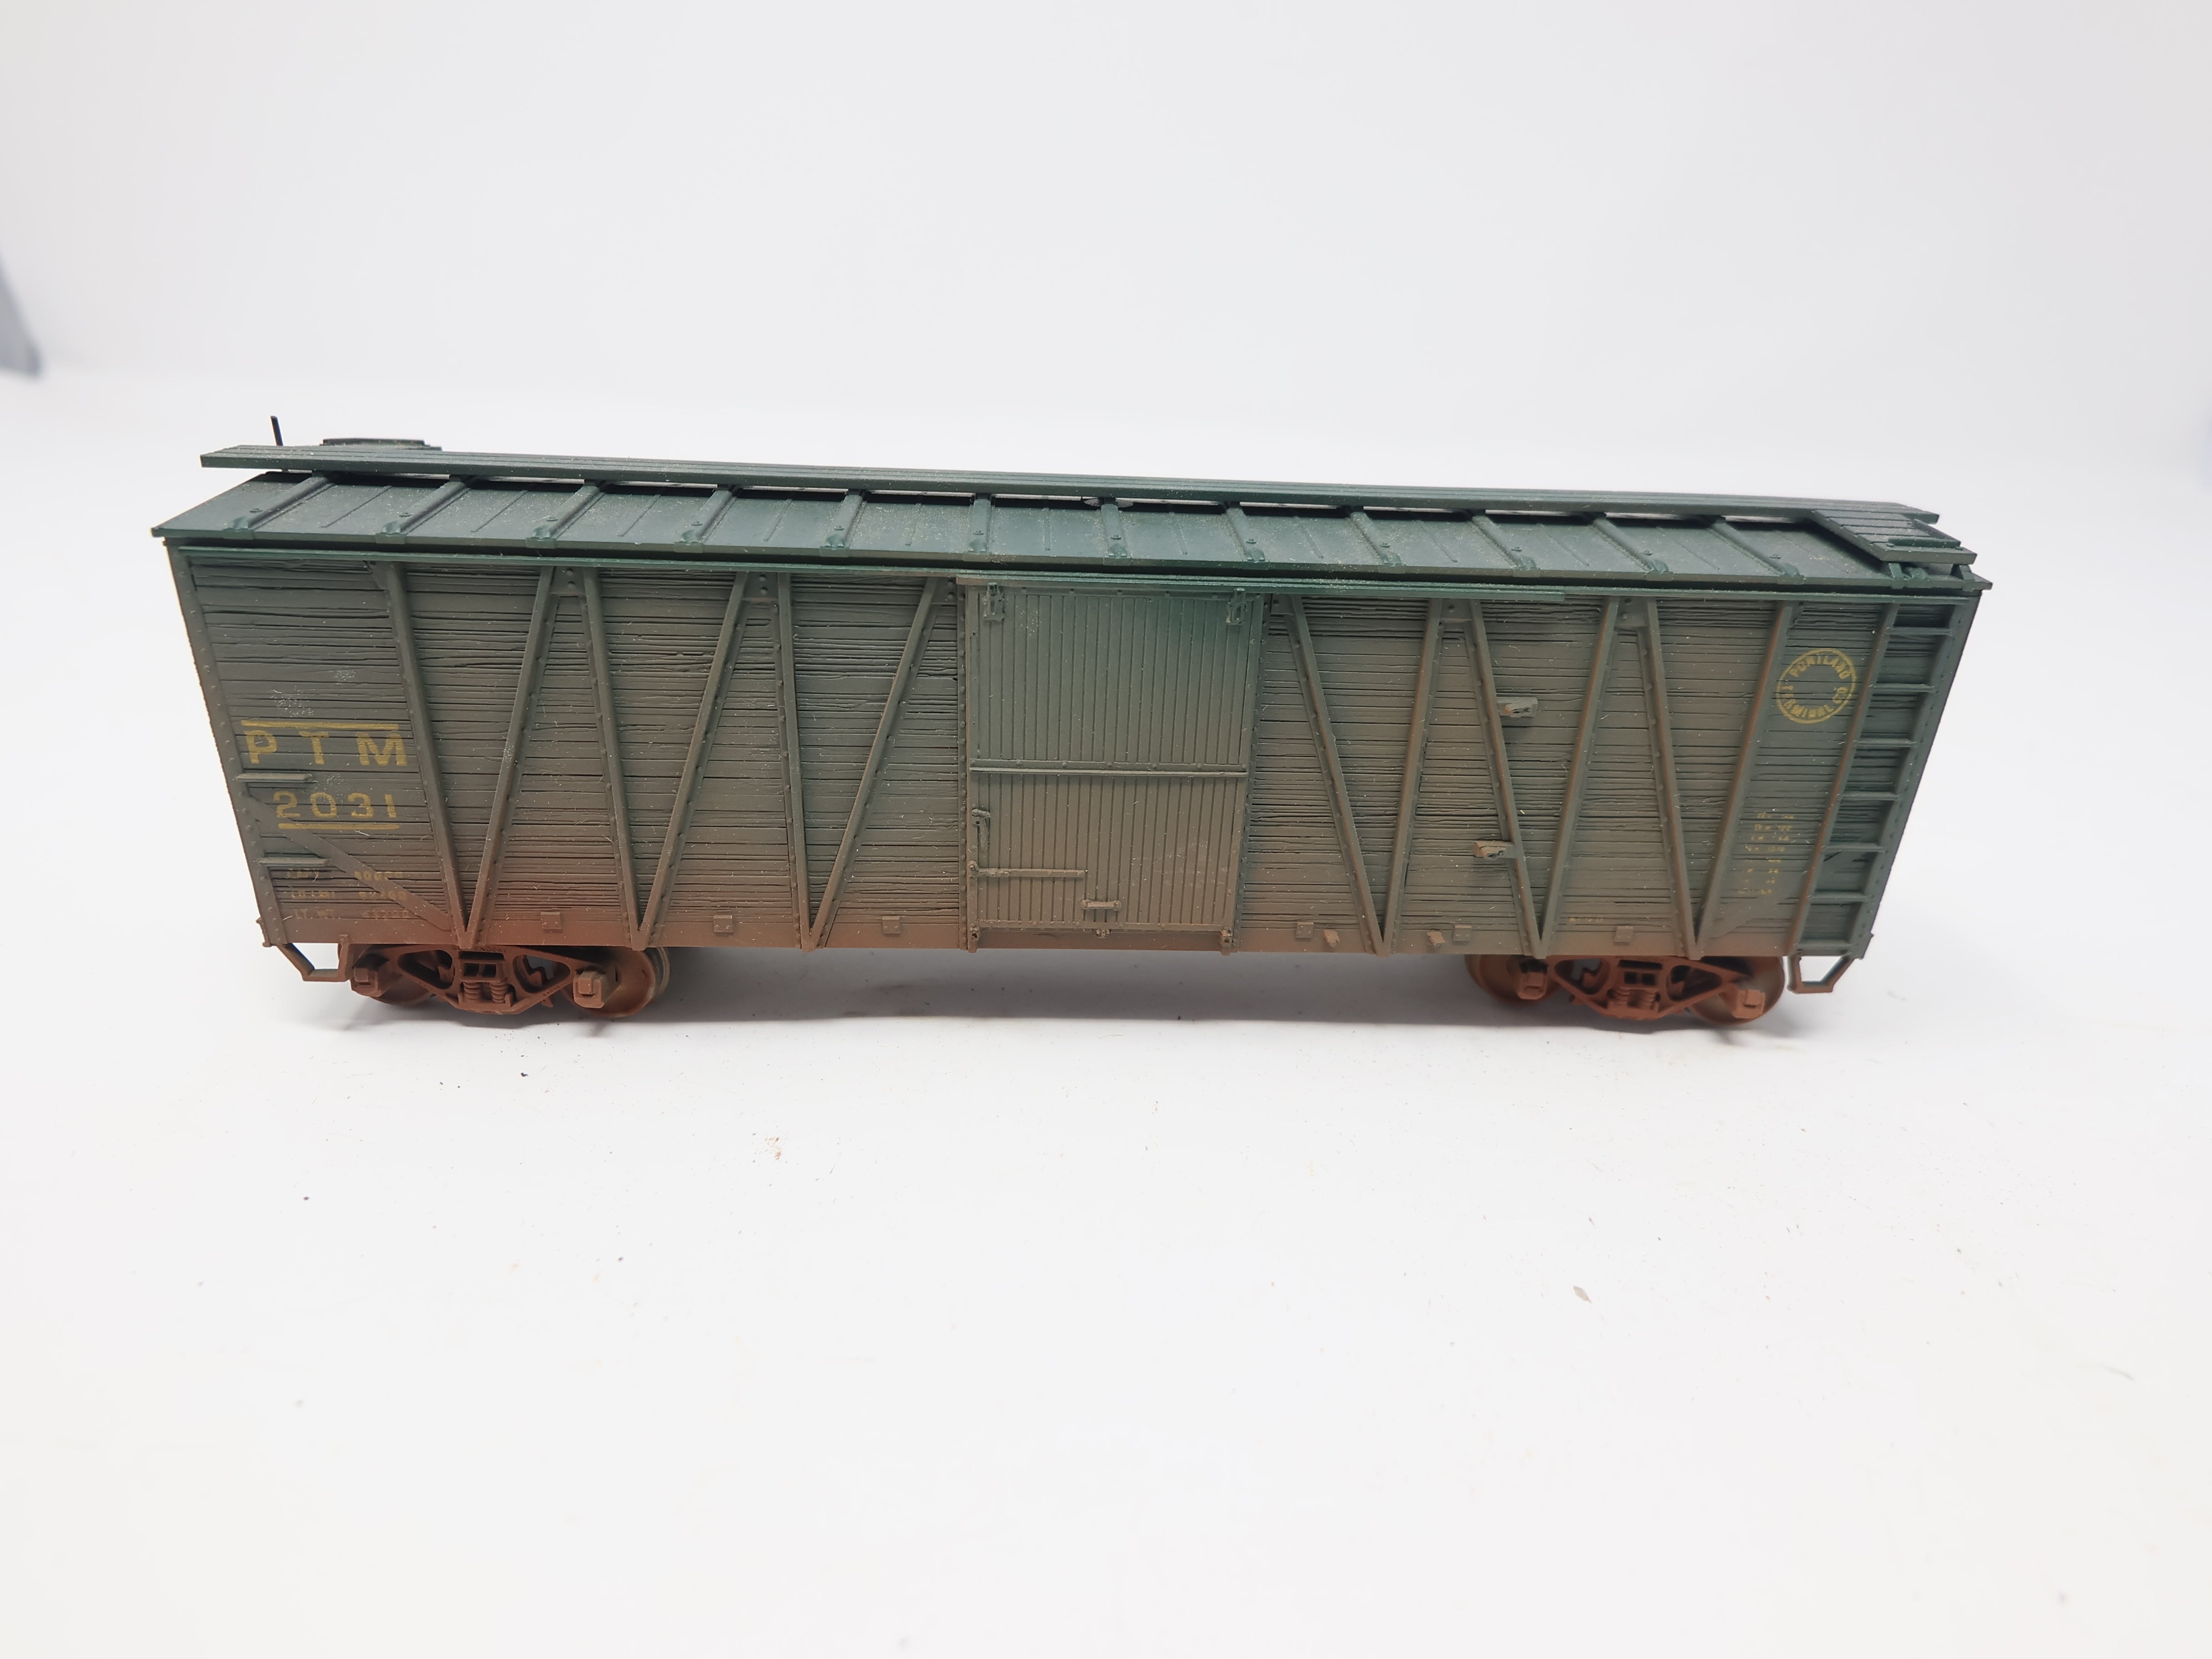 USED Accurail HO Scale, 40' Wooden Box Car, Portland Terminal Railroad PTM #2031, Weathered